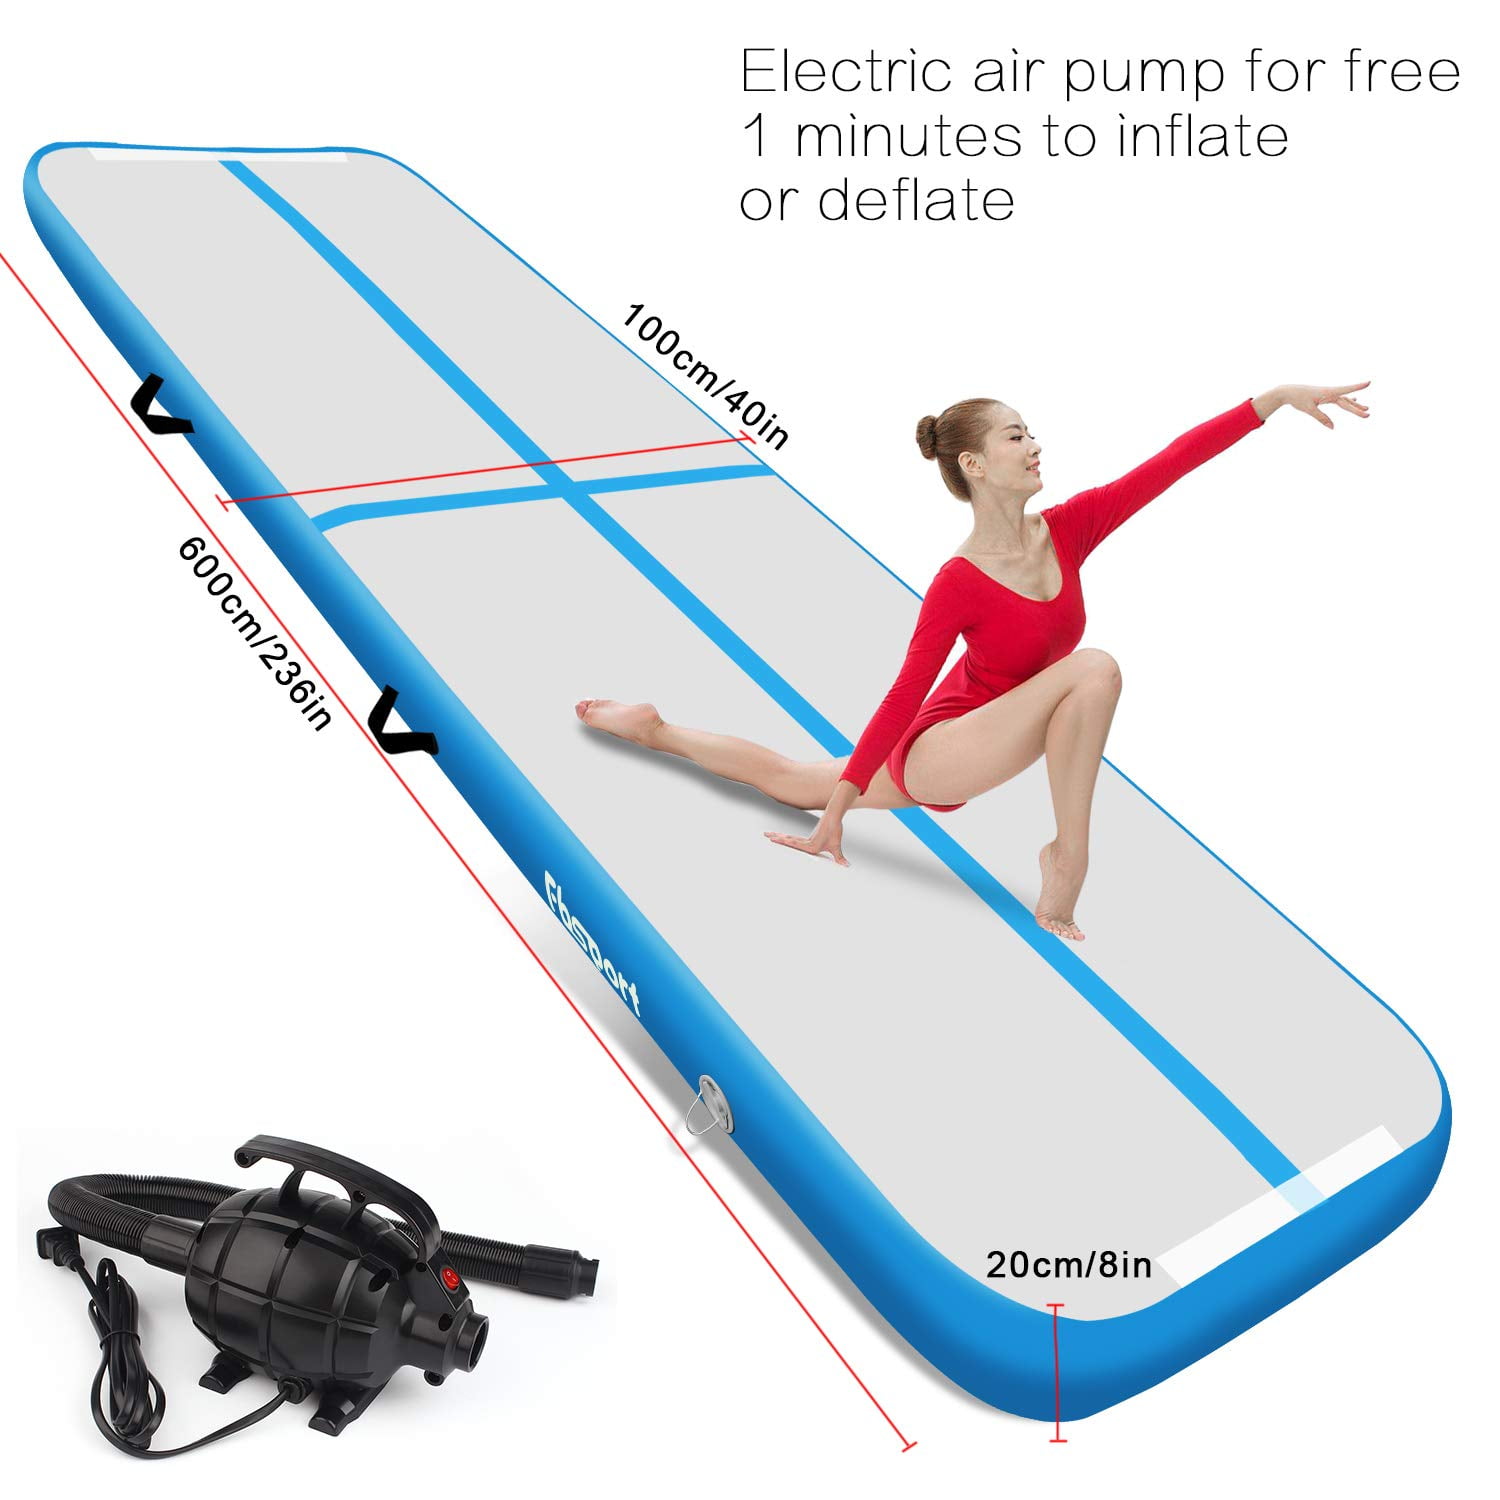 6m Inflatable Air Track Tumbling Gymnastics Mats Floor Tumble Training with Pump 